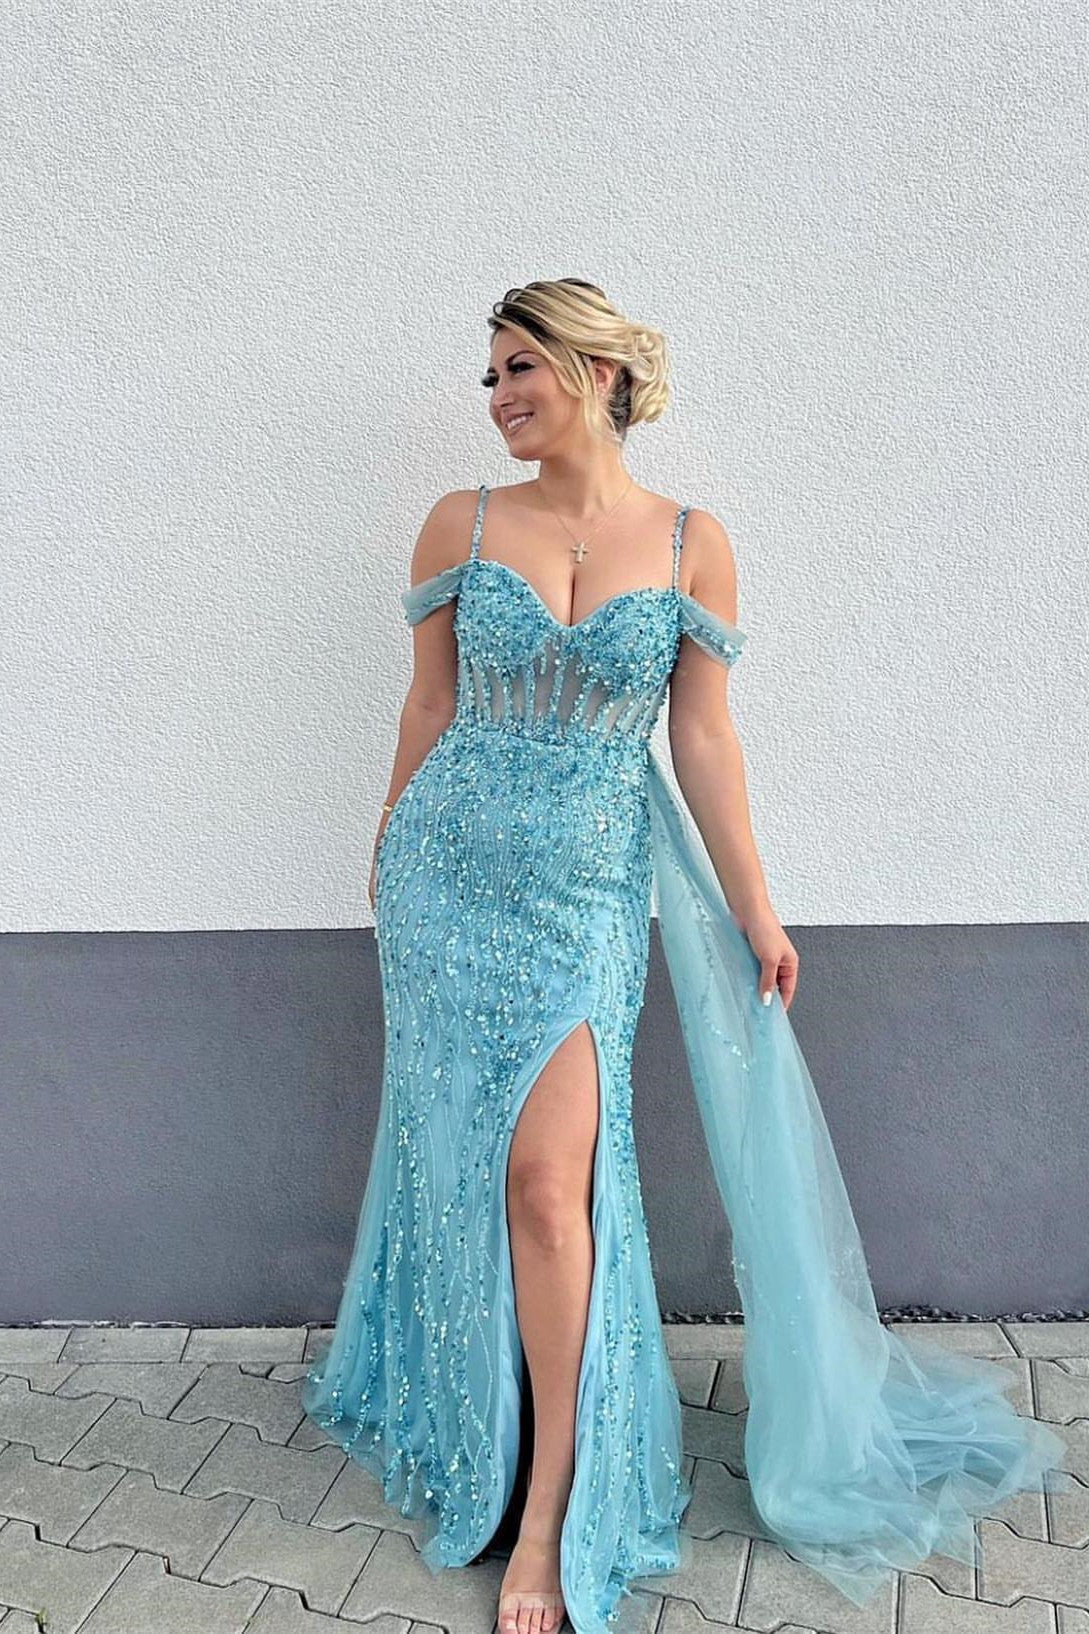 Sapphire Blue Mermaid Prom Gown with Flirty Ruffles and Sparkling Bead Embellishments